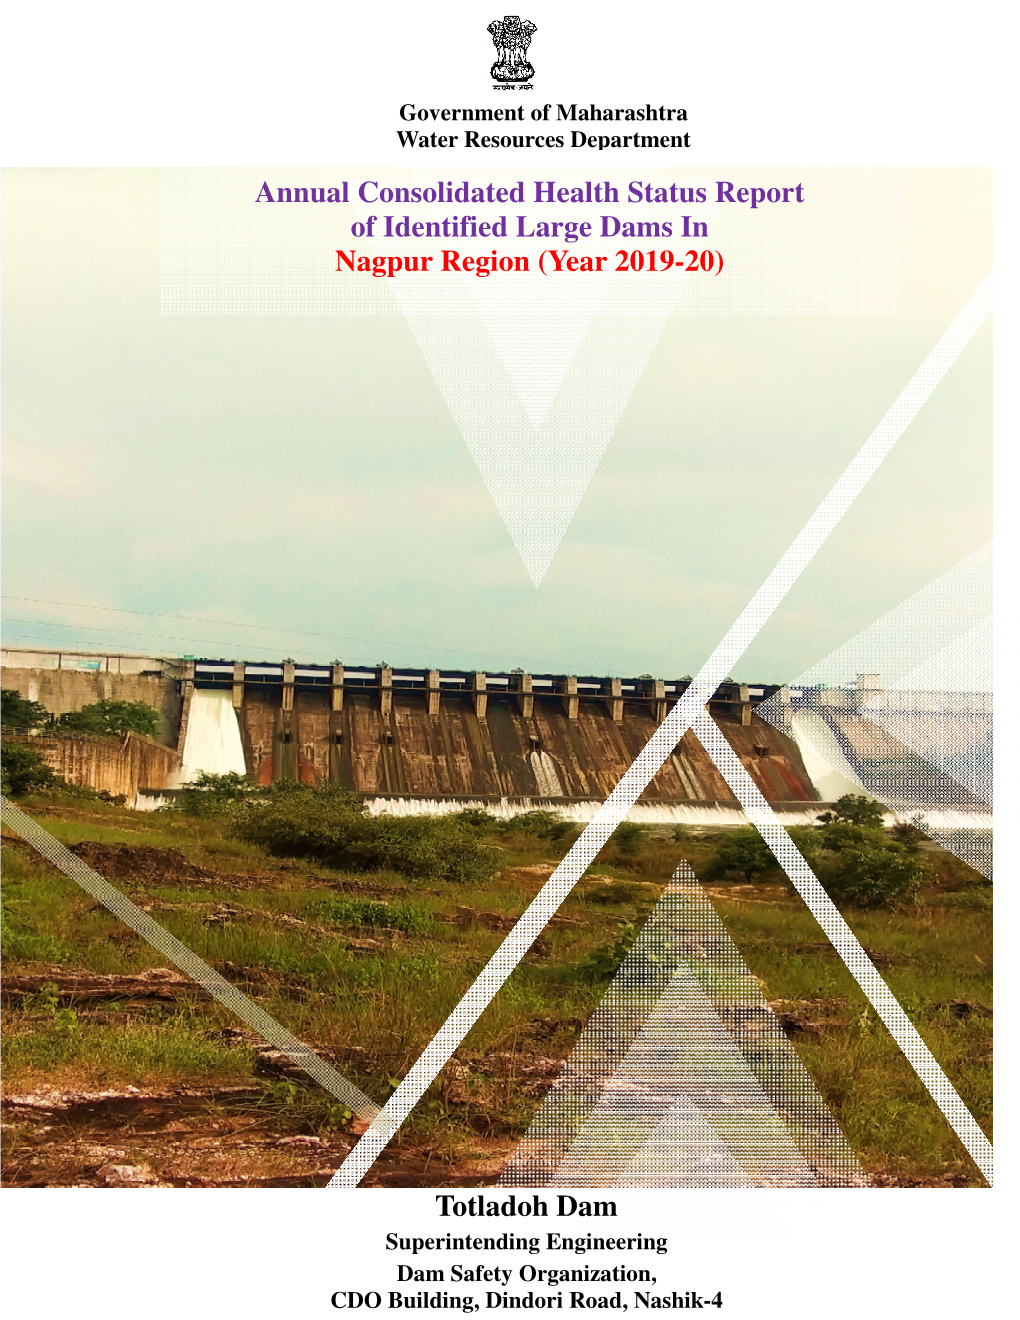 Annual Consolidated Health Status Report of Identified Large Dams in Nagpur Region (Year 2019-20)